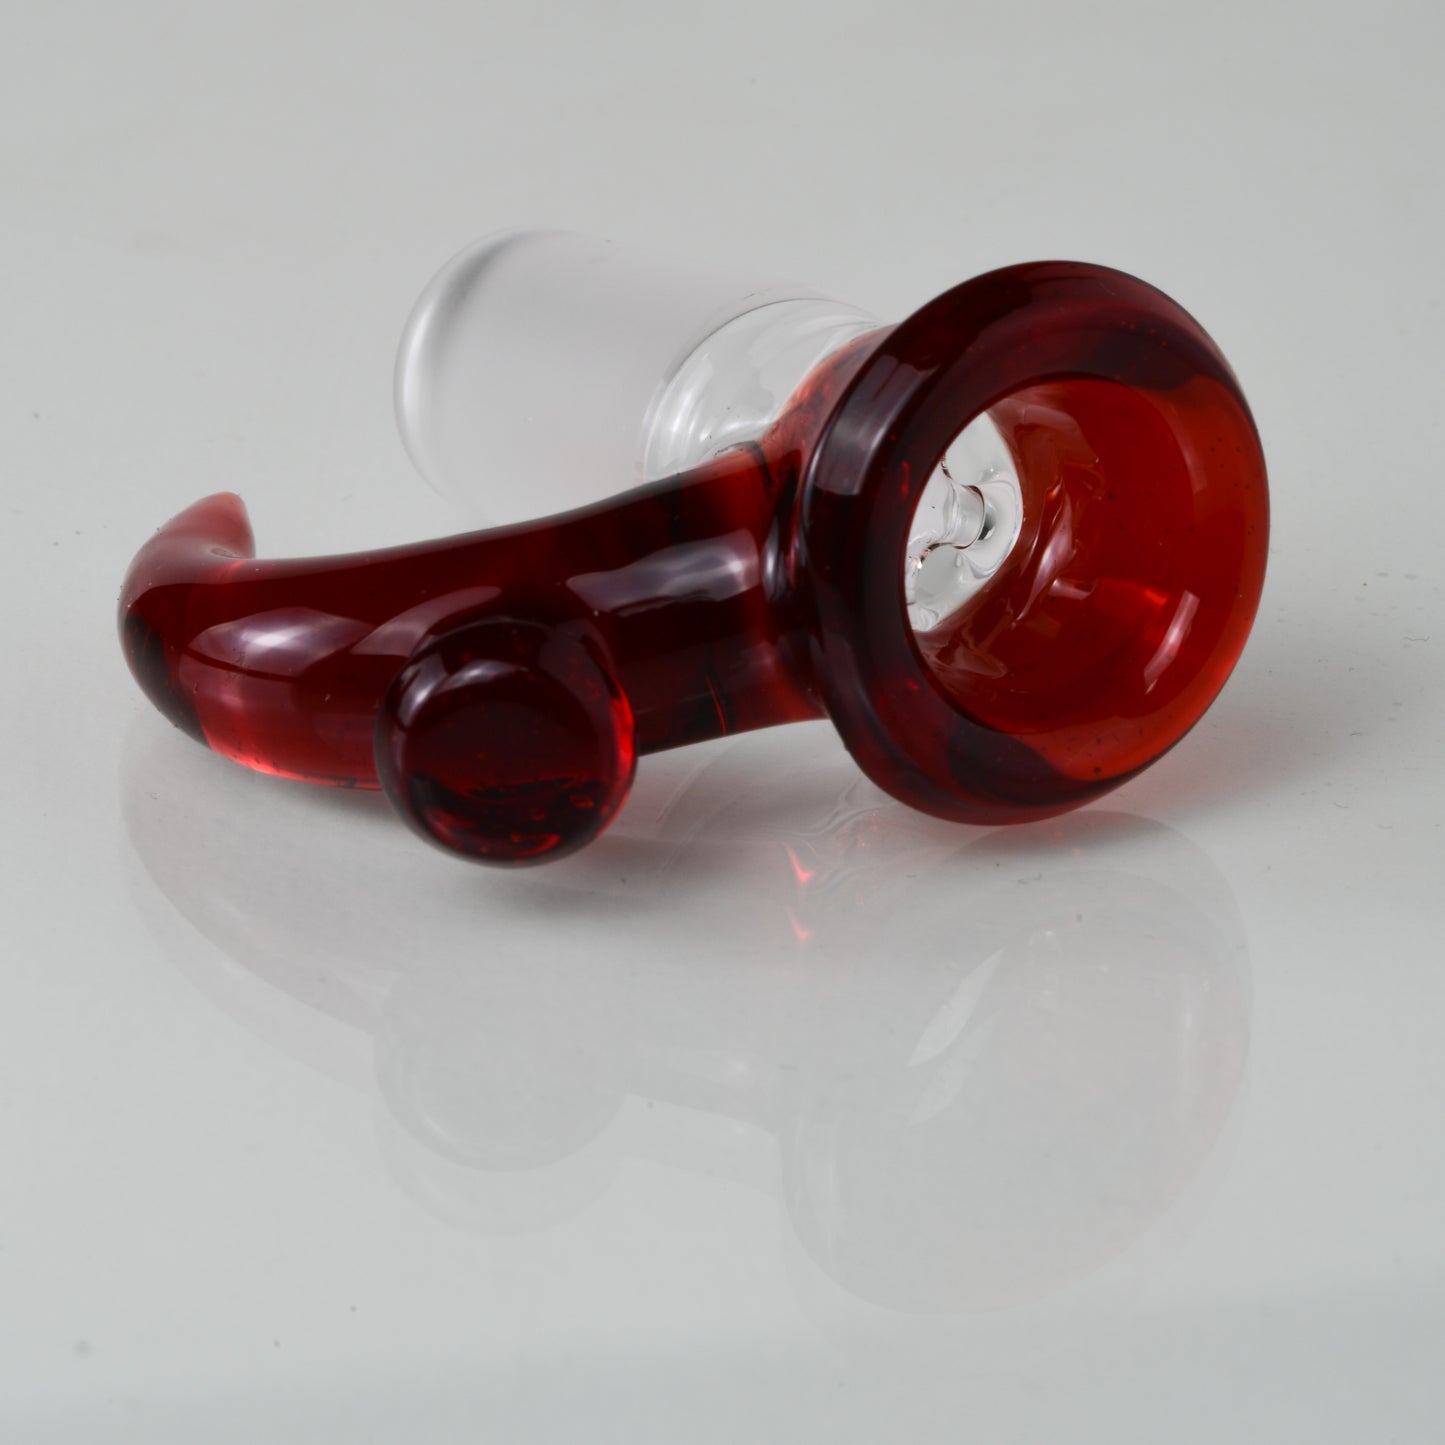 Jamms Glass - 18mm 4 Hole Single Colour Slide - Ruby Slippers